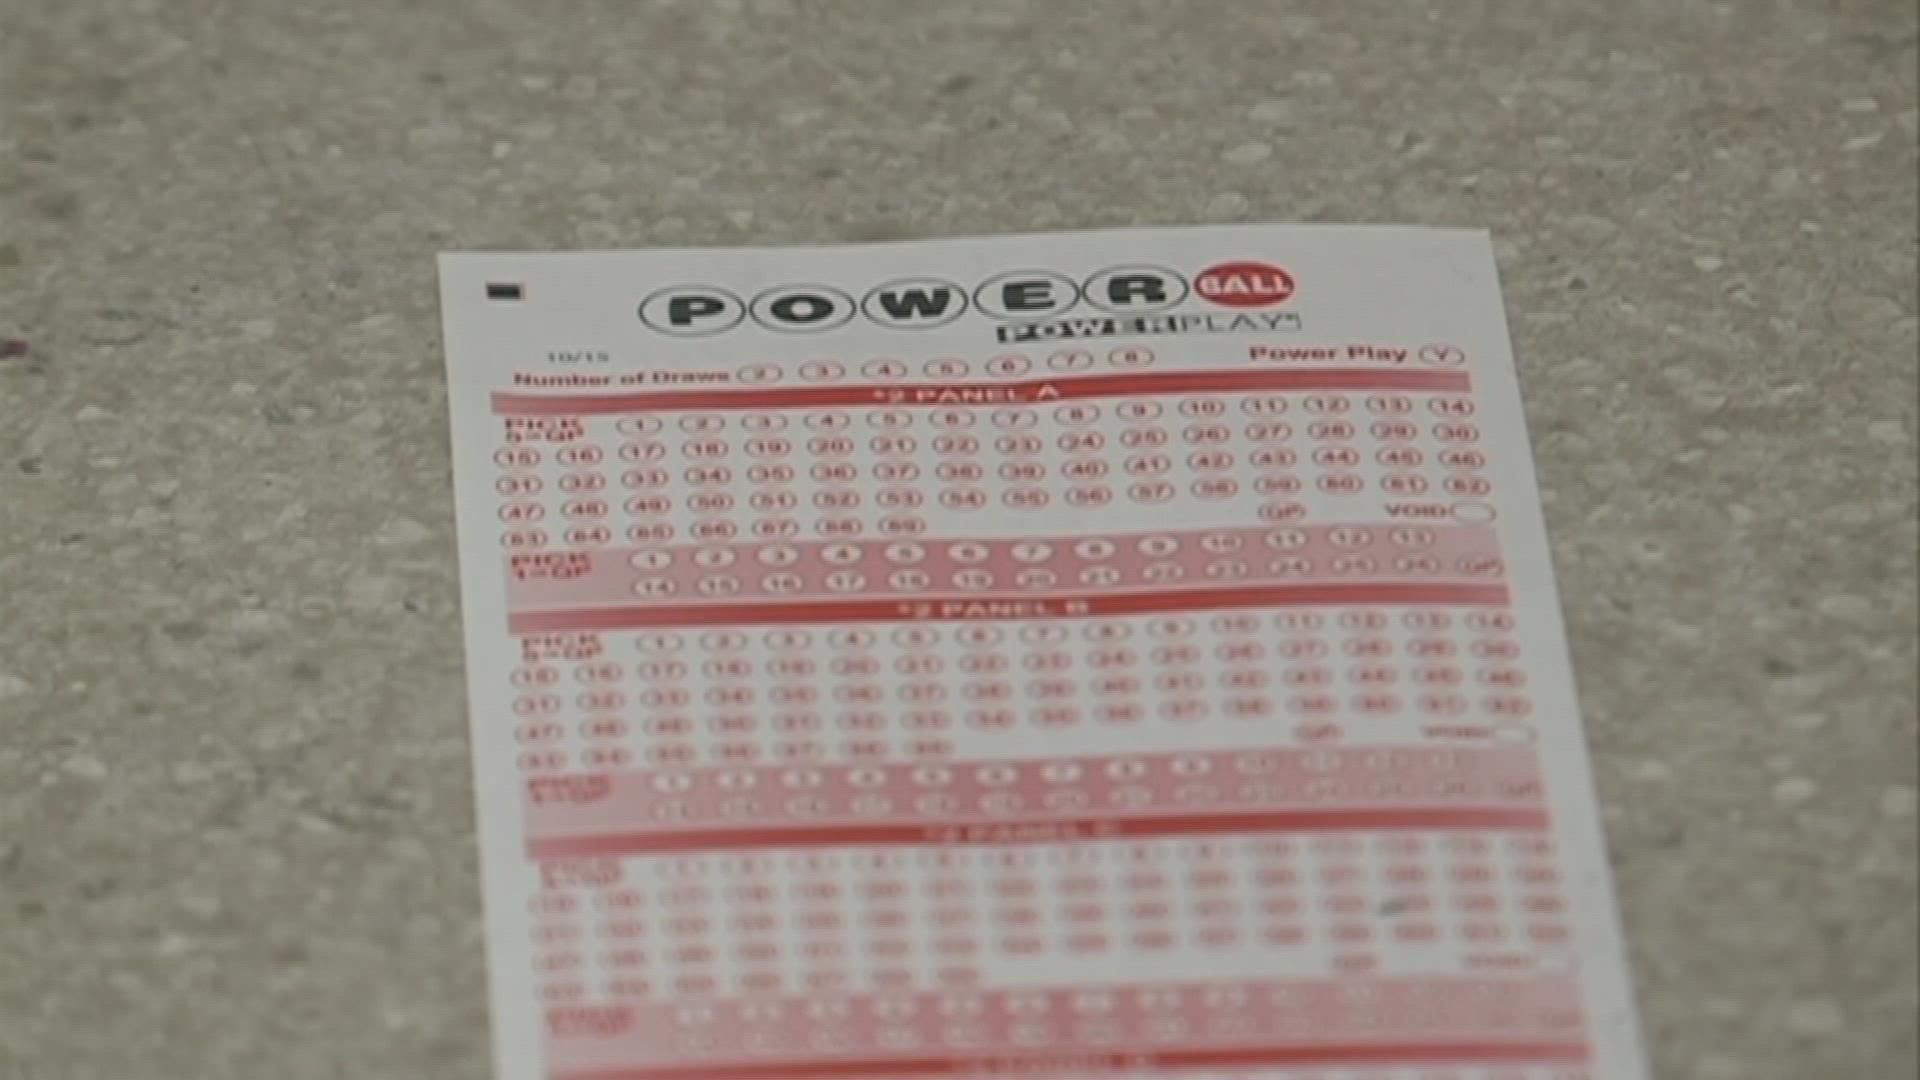 The lucky winning ticket was purchased at a Z-Mart on the northeast side of San Antonio.